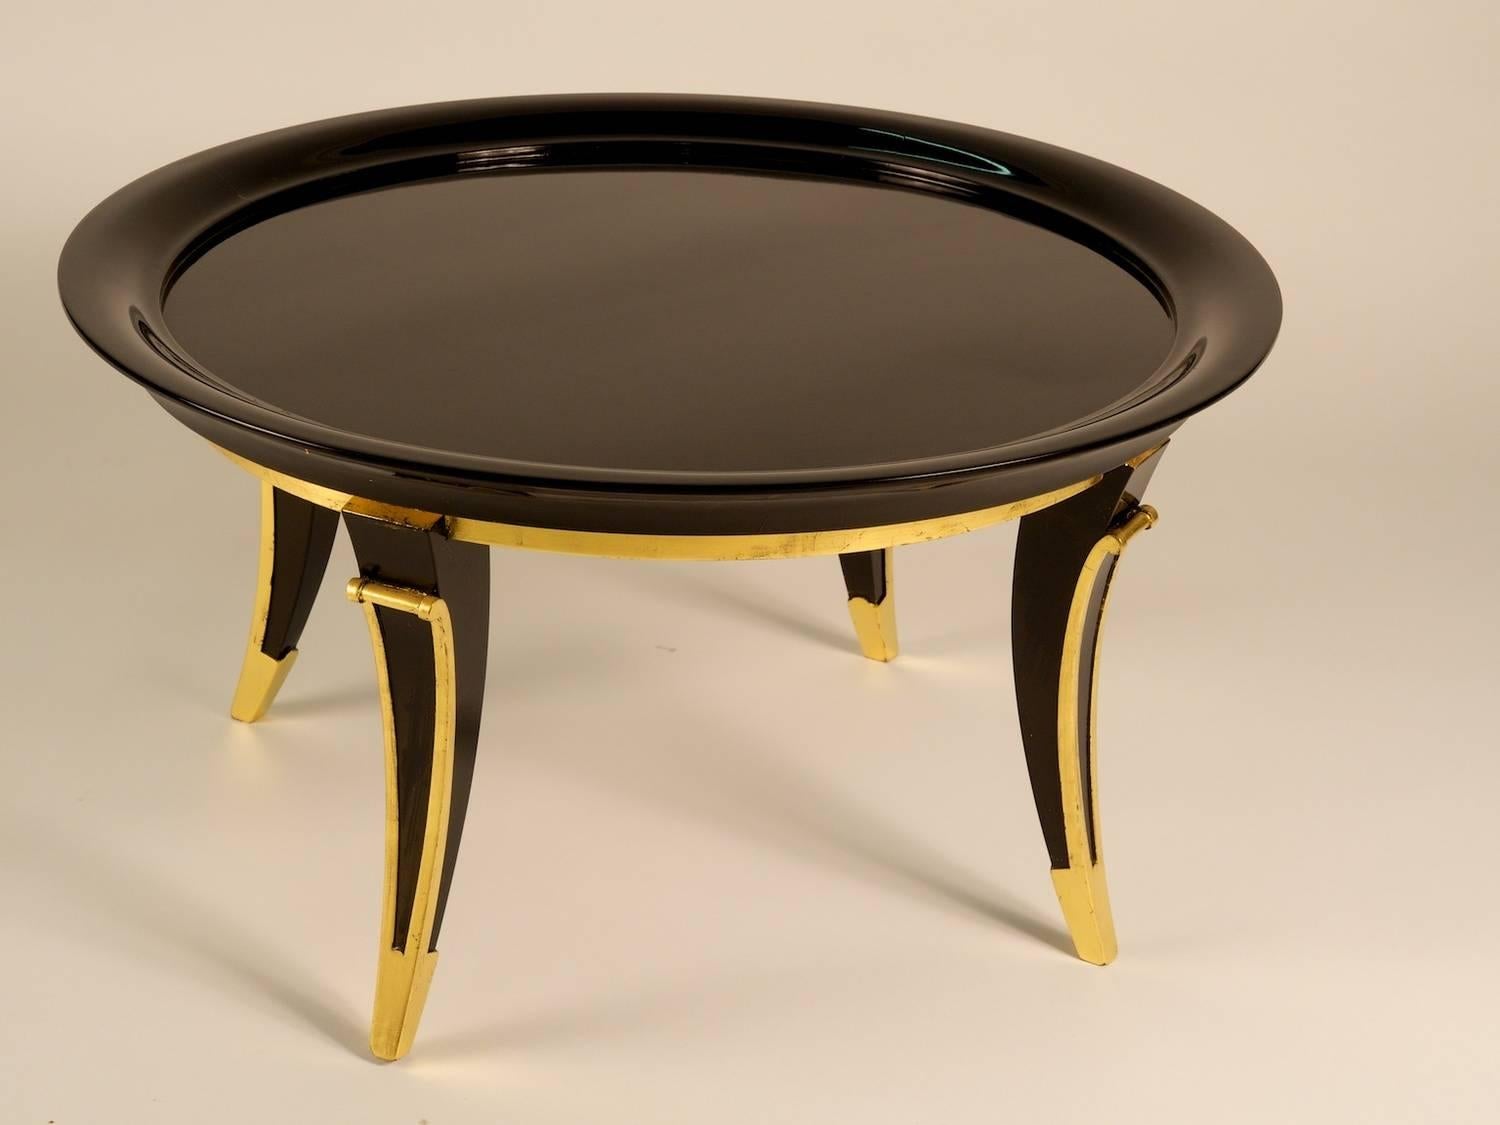 French 1940s Art Deco low cocktail/coffee/side table in black lacquer with gilt trim by Rousseau et Lardin. Restored and refinished.